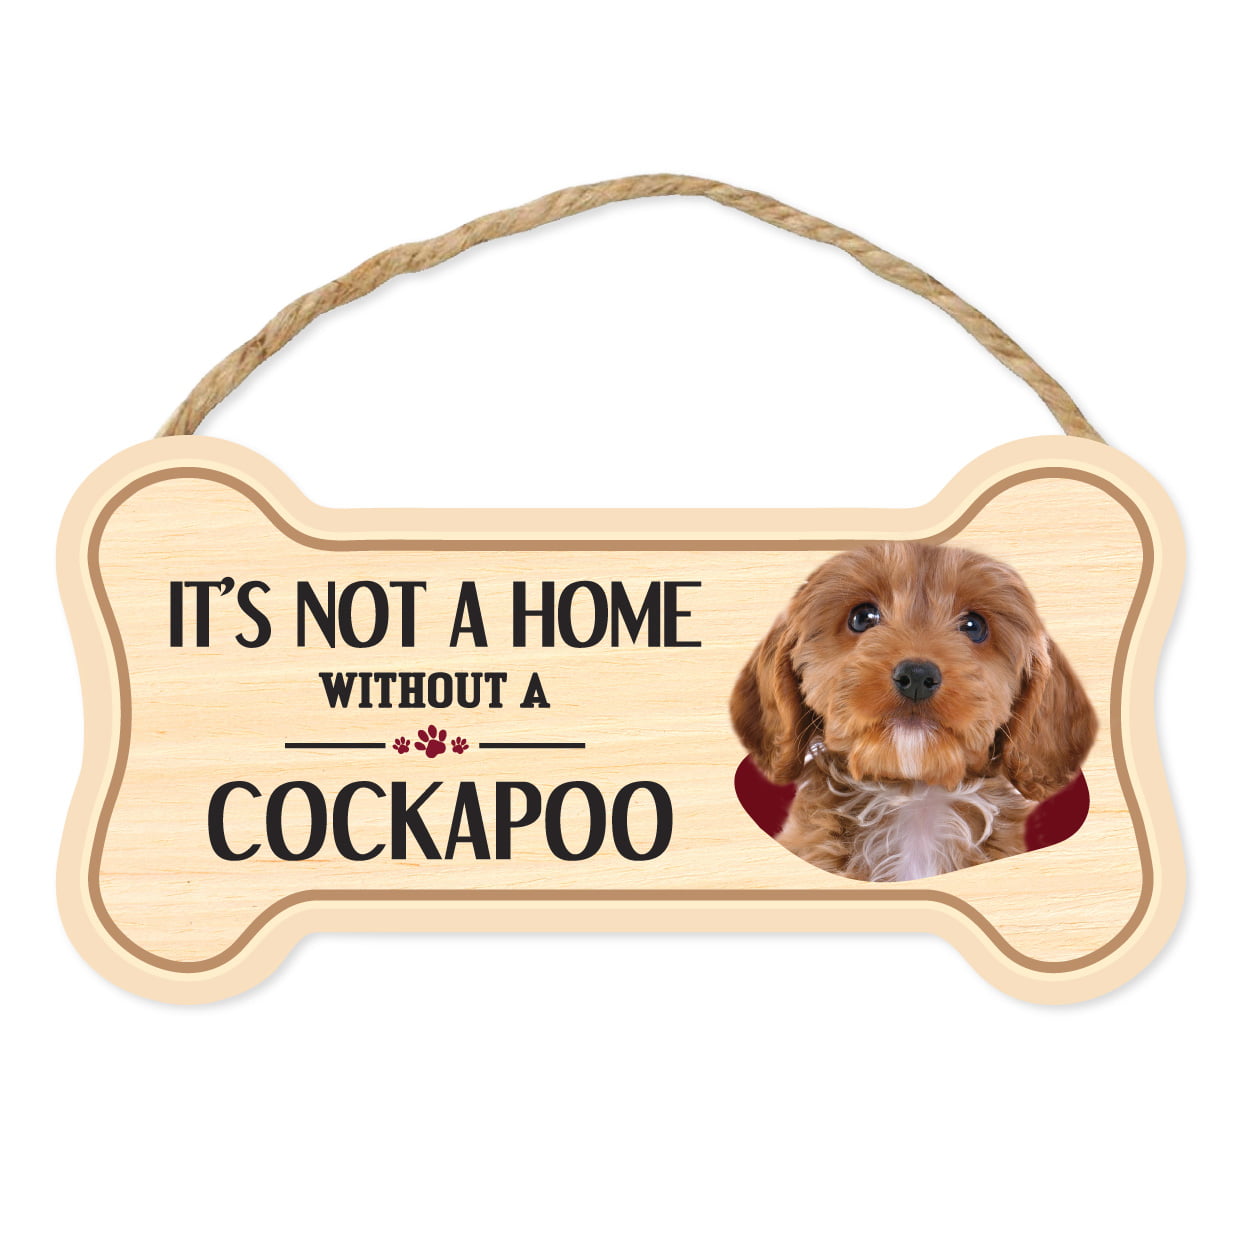 Cockapoo "A House is Not a Home without a Cockapoo" Dog Sign Plaque featuring 